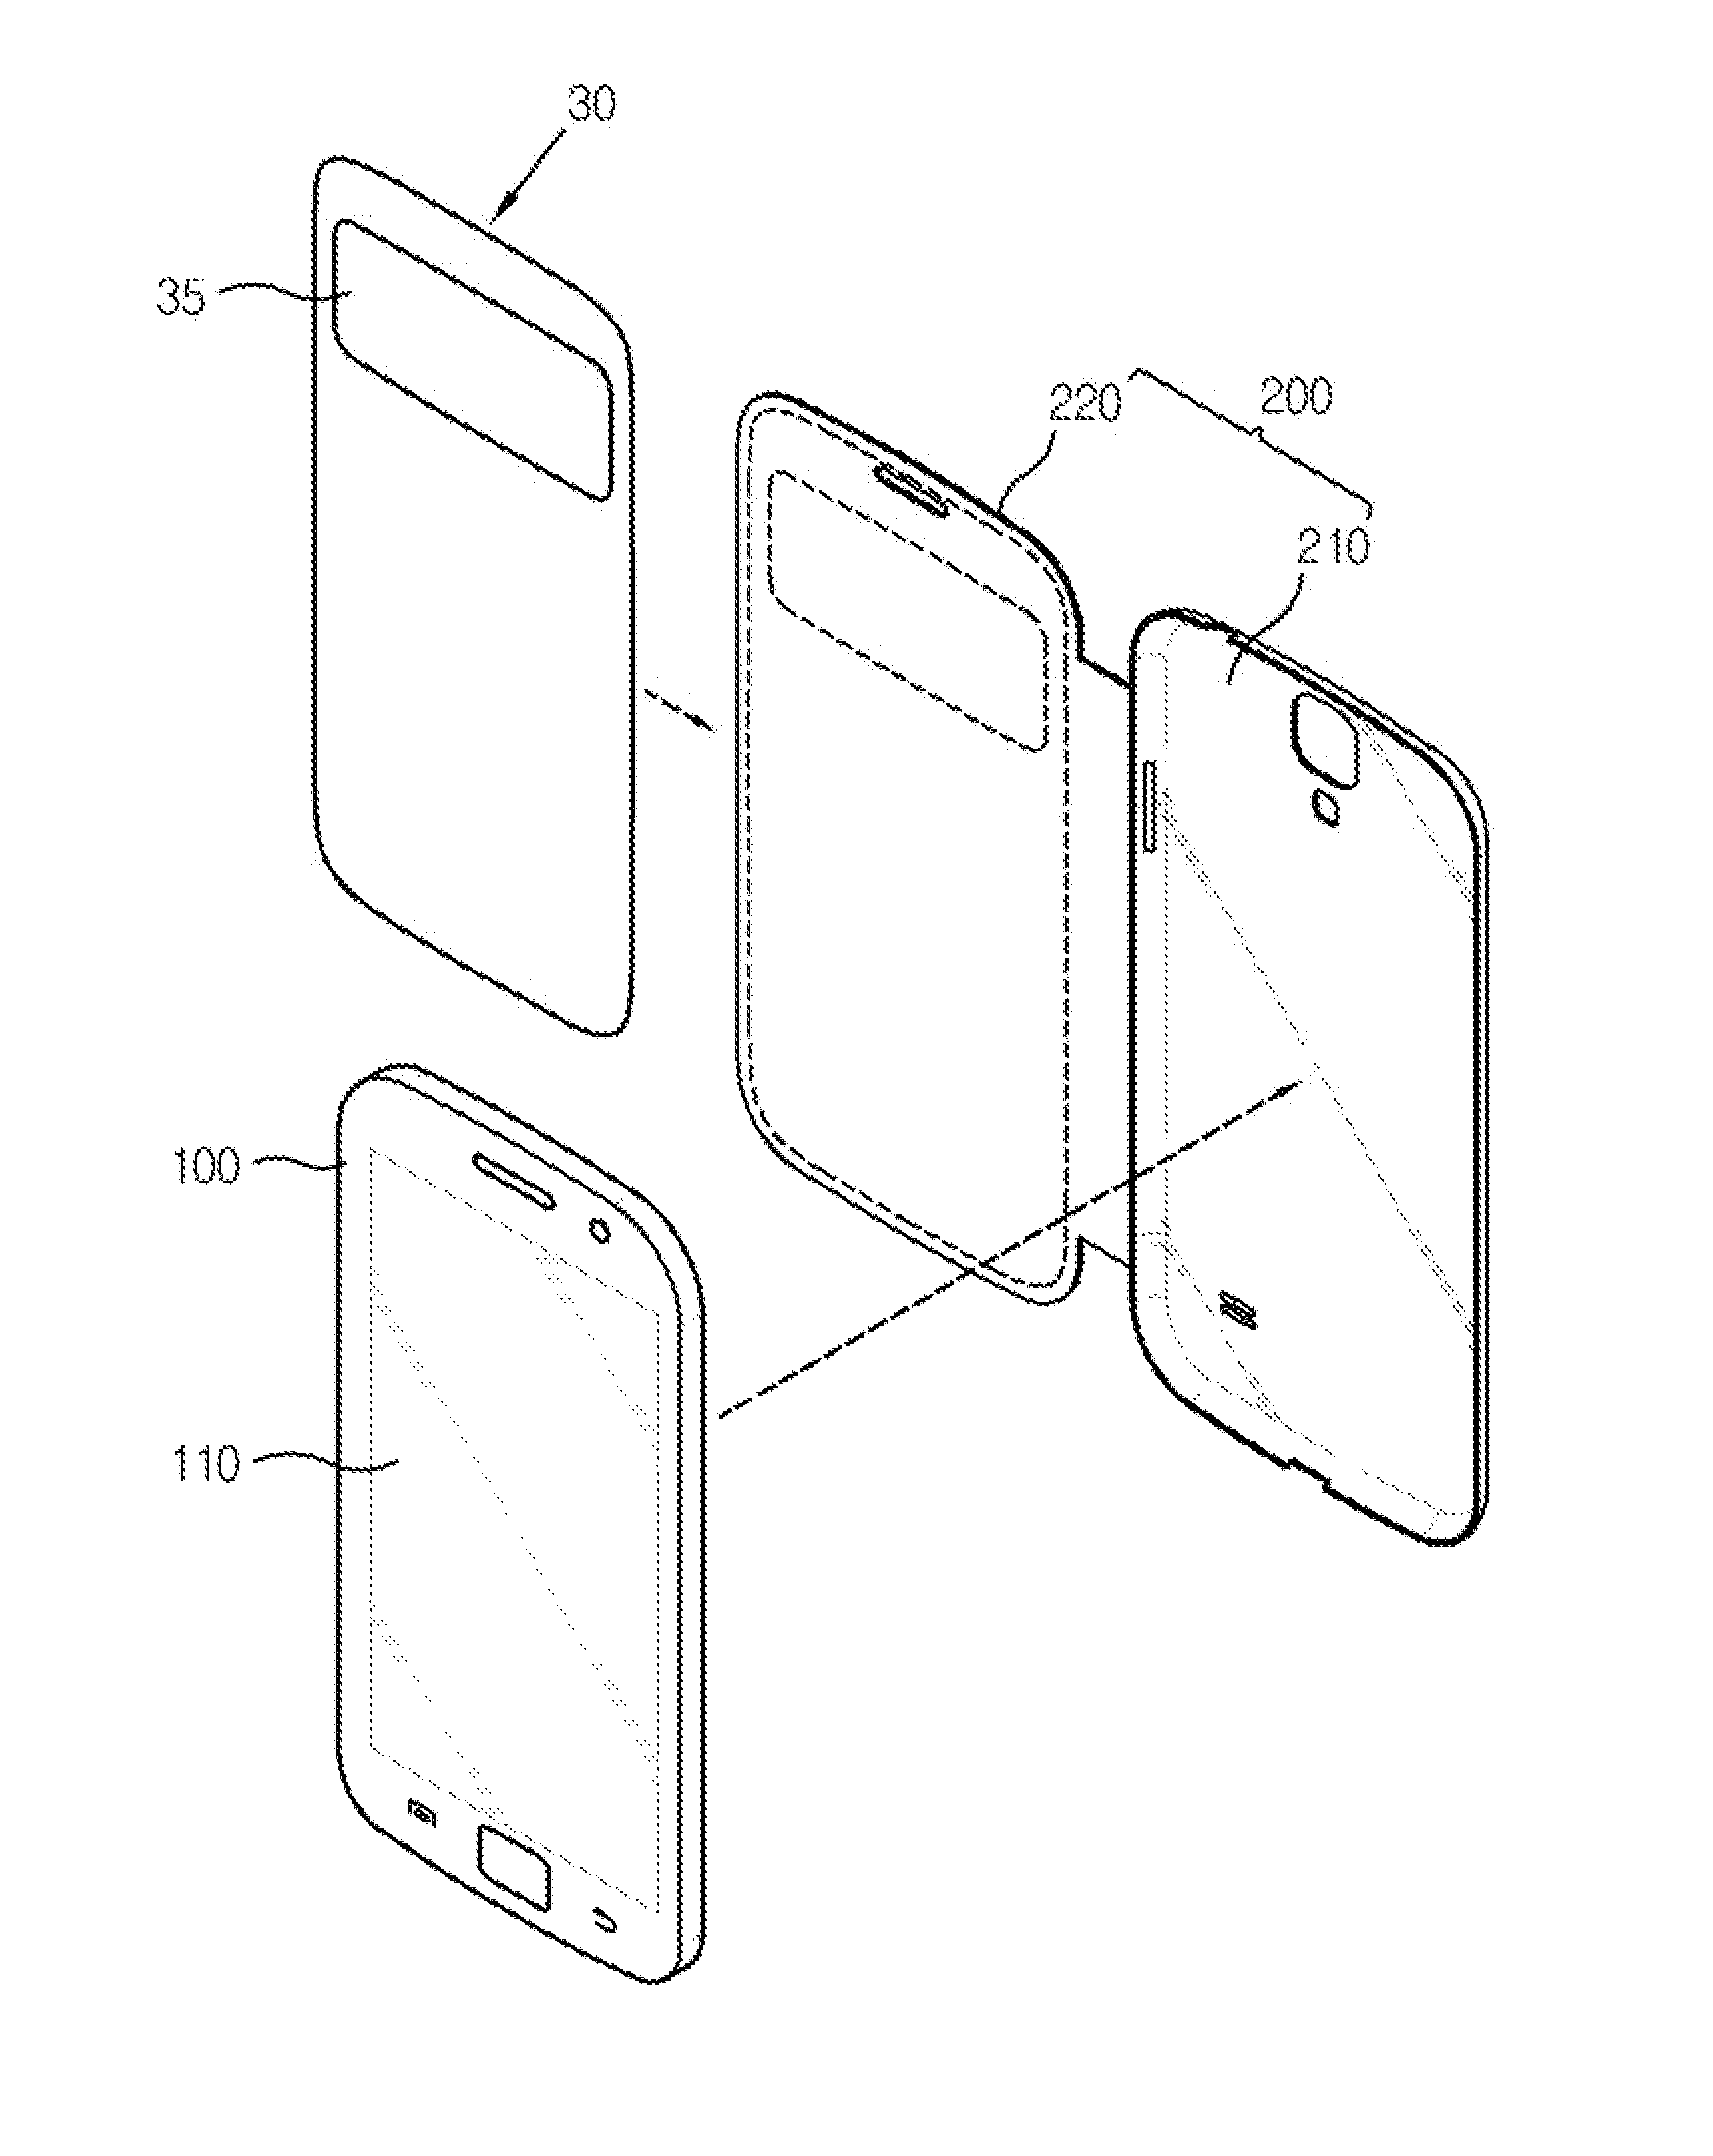 Flip cover plate for mobile terminal